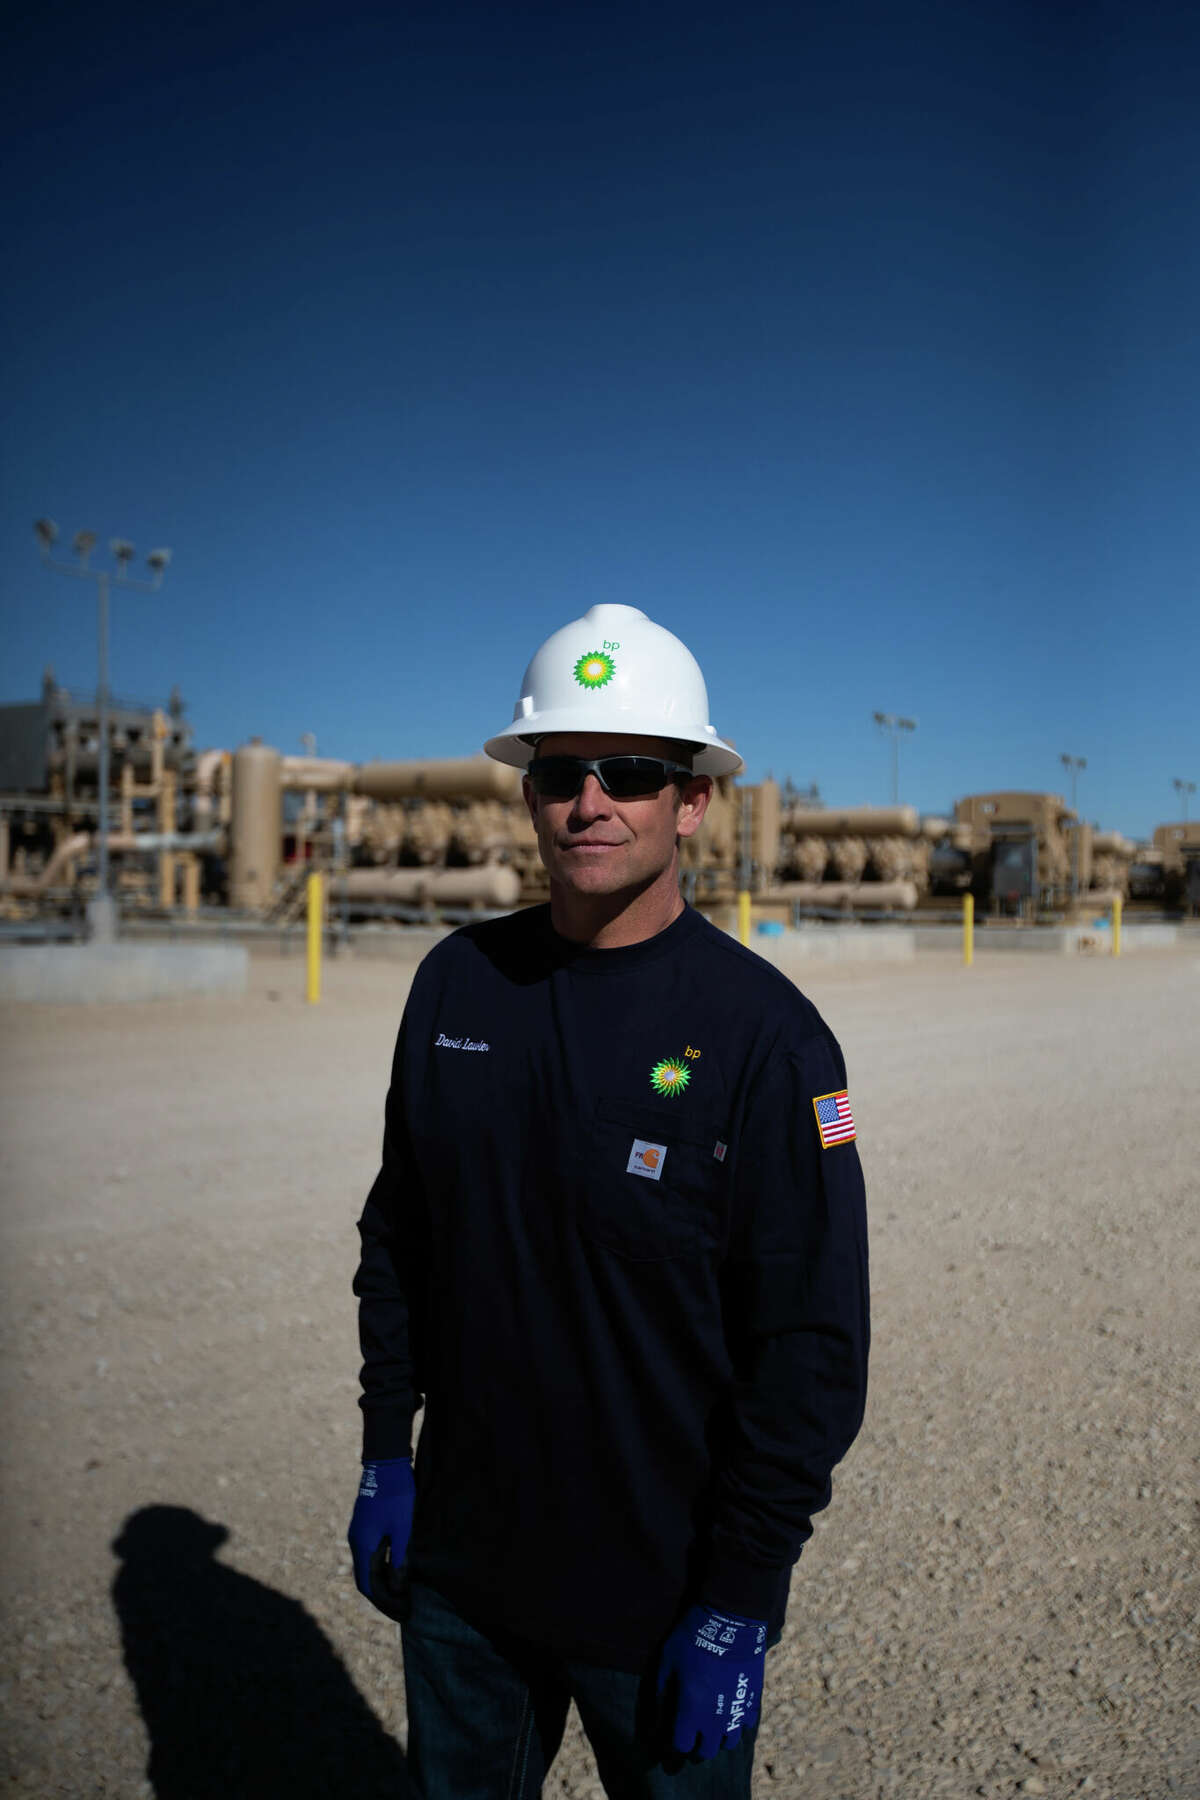 BPX Energy chief executive officer David Lawler at Grand Slam, an electrified central oil, gas, and water handling facility that reduces operational emissions at the Permian Basin, Friday, Nov. 11, 2022.